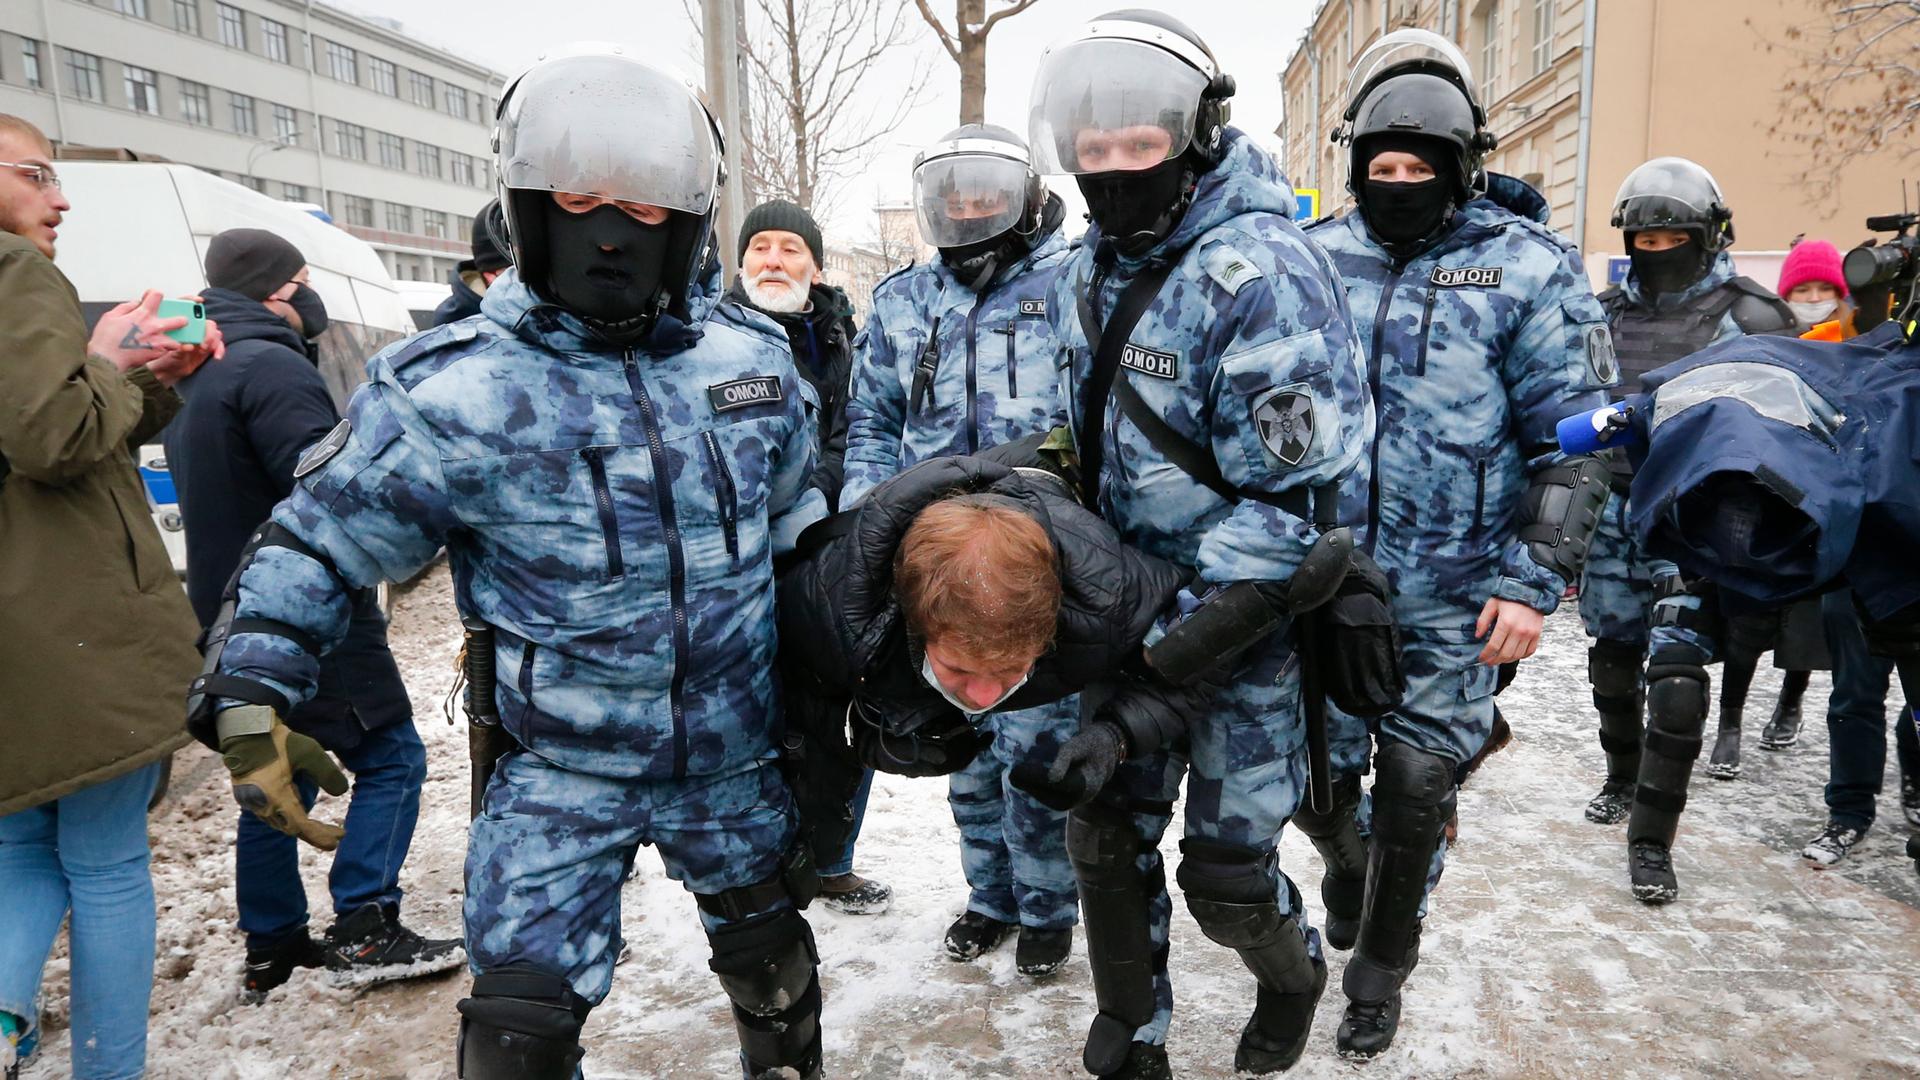 Several police officers are shown wearing winter camoflage and helmets while carrying a man by his arms and legs.